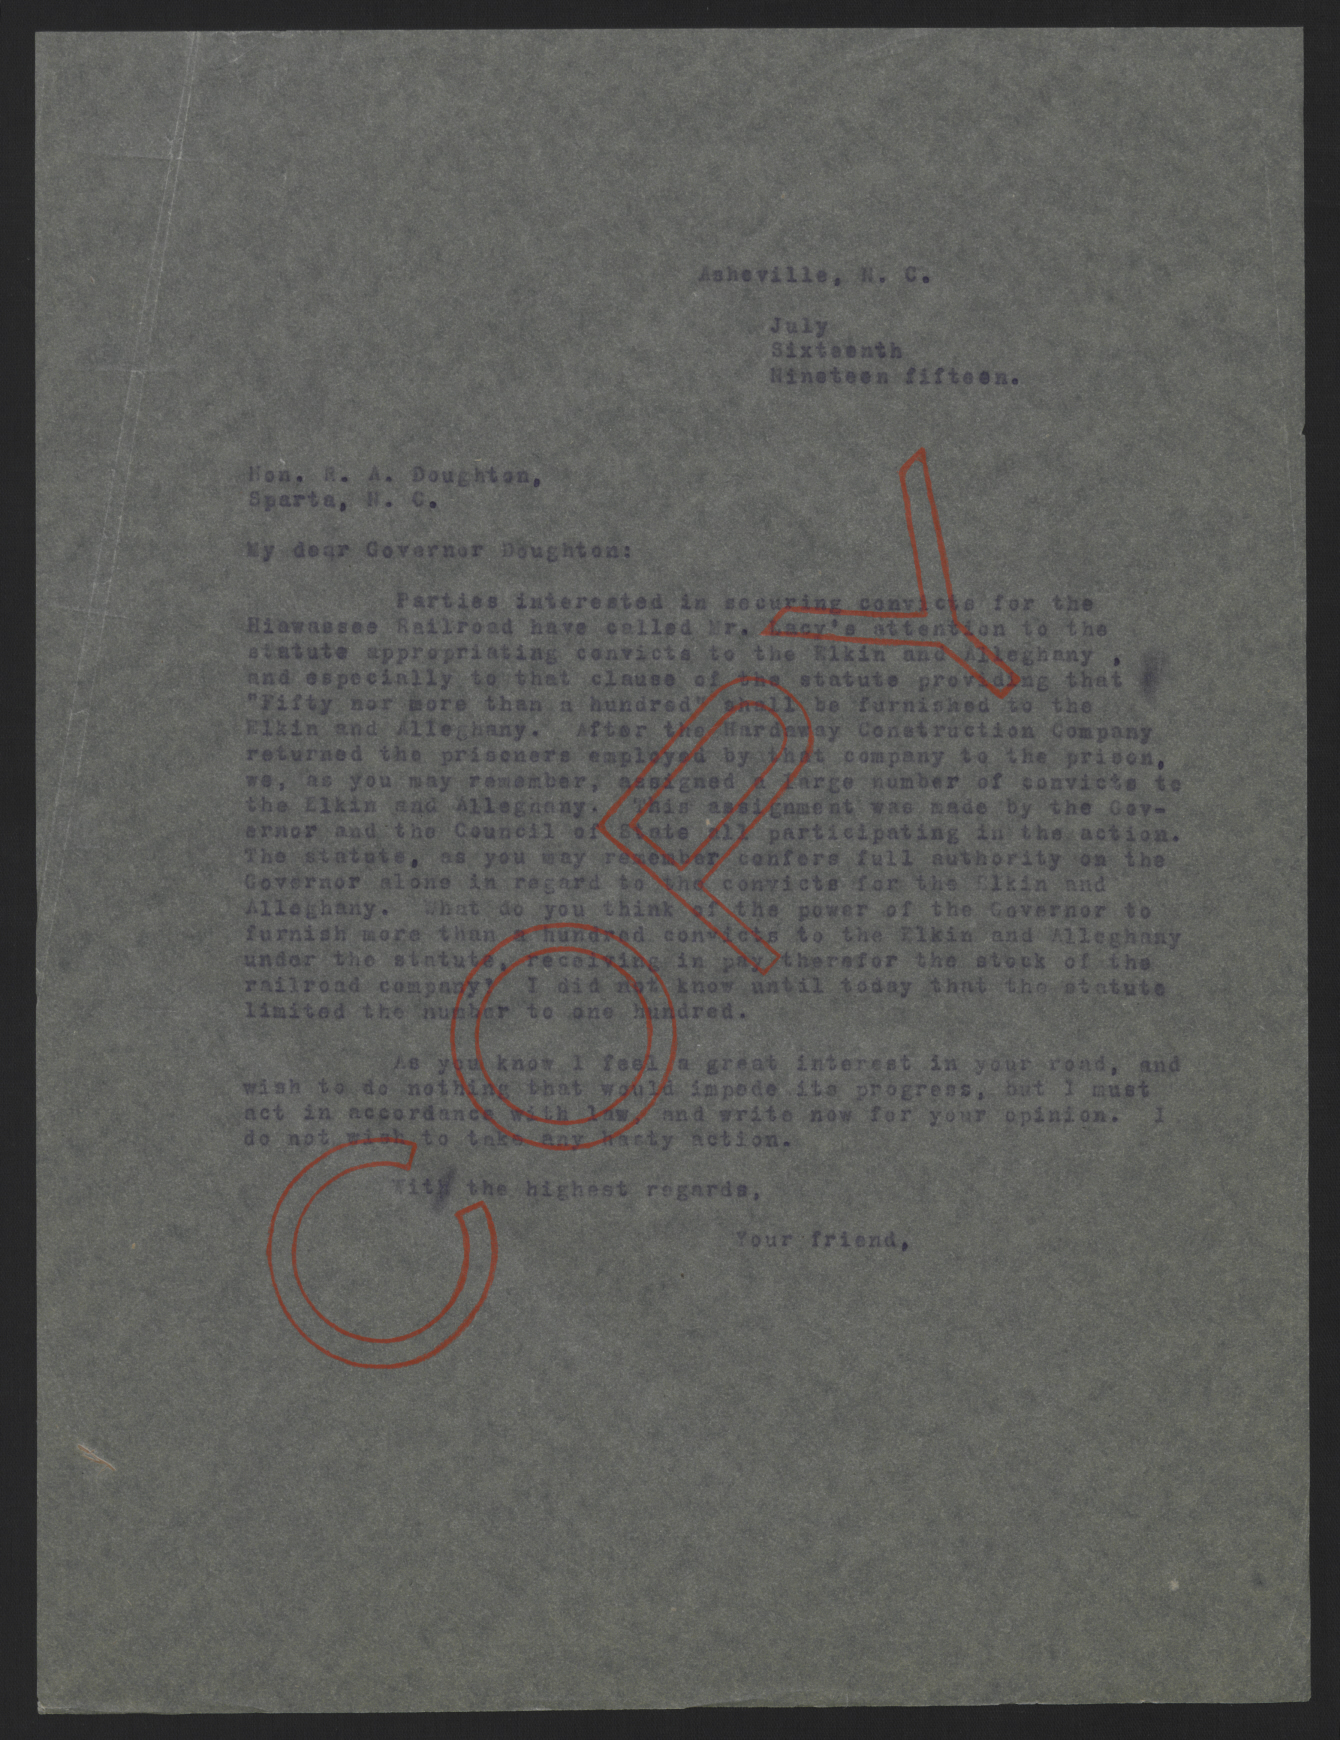 Letter from Craig to Doughton, July 16, 1915